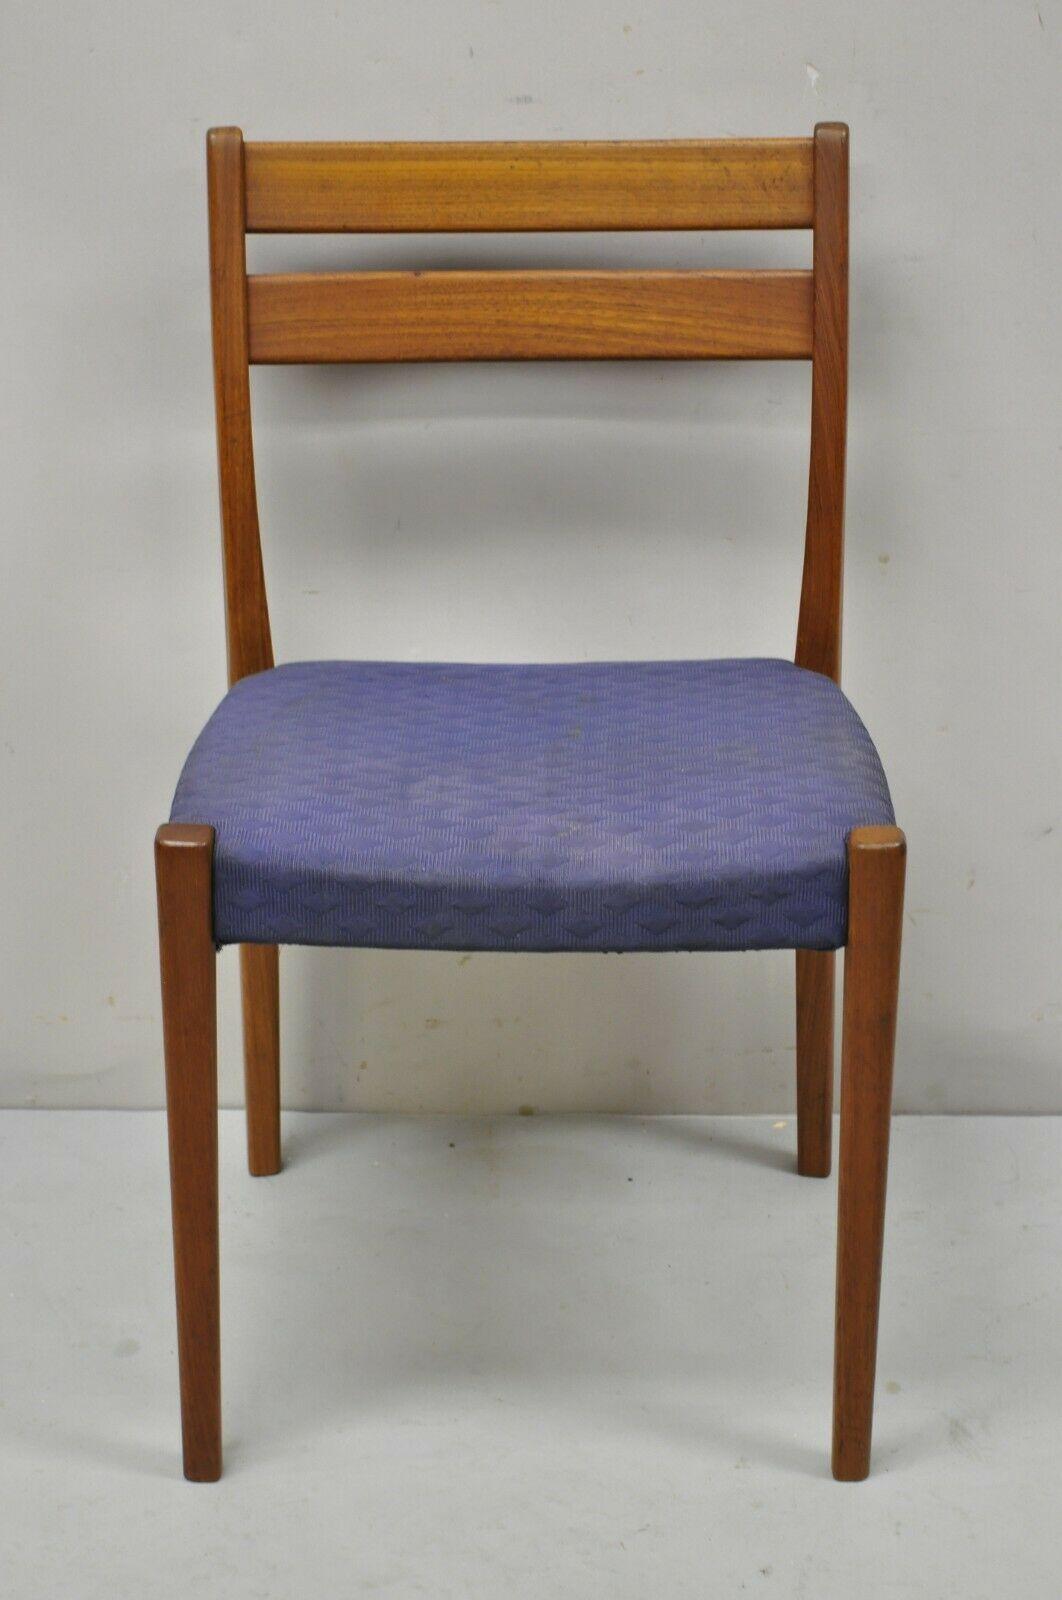 Svegards Markaryd Swedish Danish Modern teak dining side chair, Sweden. Item features beautiful wood grain, original stamp, tapered legs, clean modernist lines, quality craftsmanship, great style and form. Circa mid 20th century. Measurements: 31